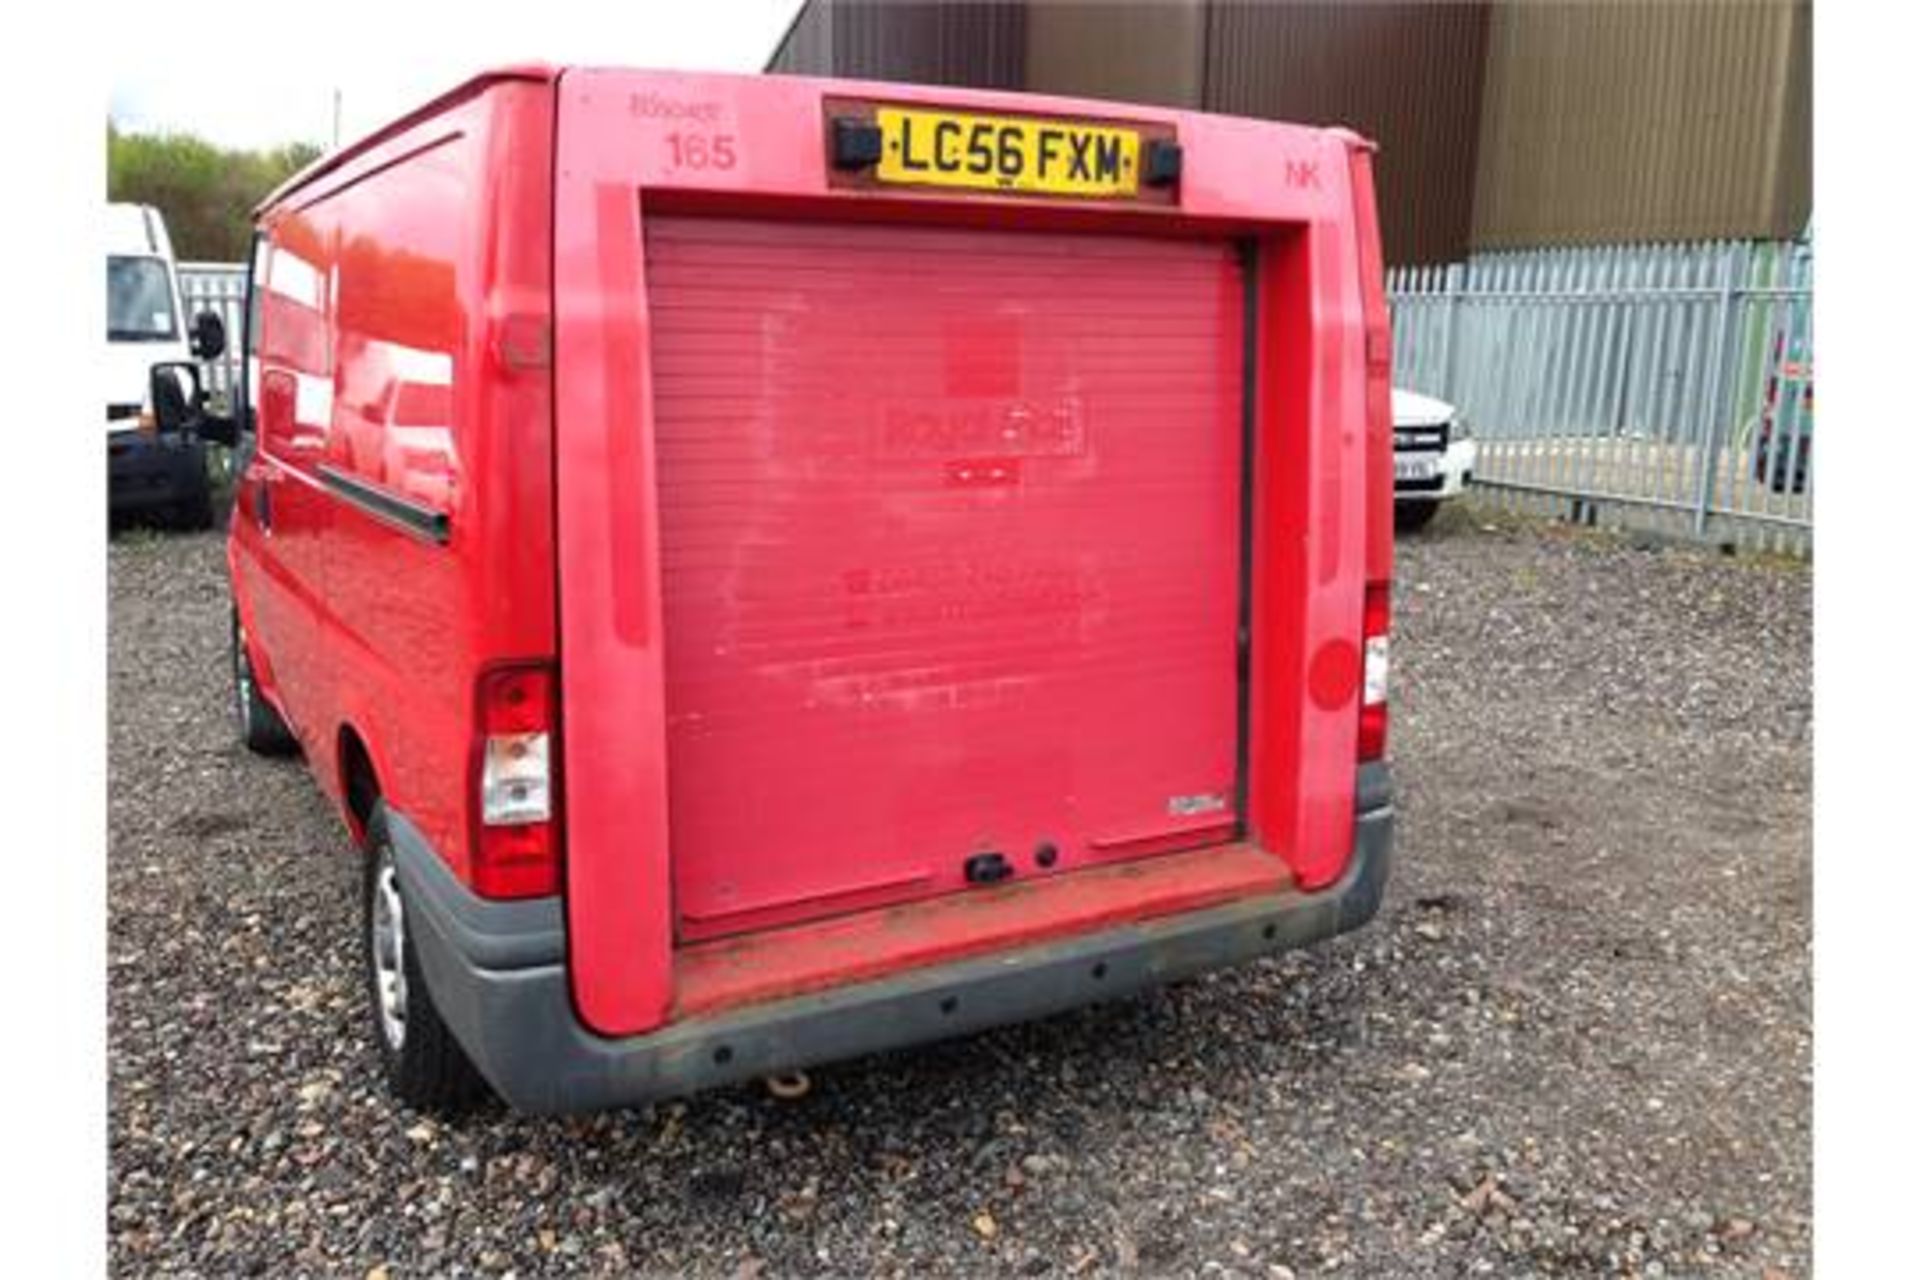 2006 56 REG FORD TRANSIT VAN WITH REAR SHUTTER DOOR FITTED 1 OWNER ROYAL MAIL - Image 4 of 17